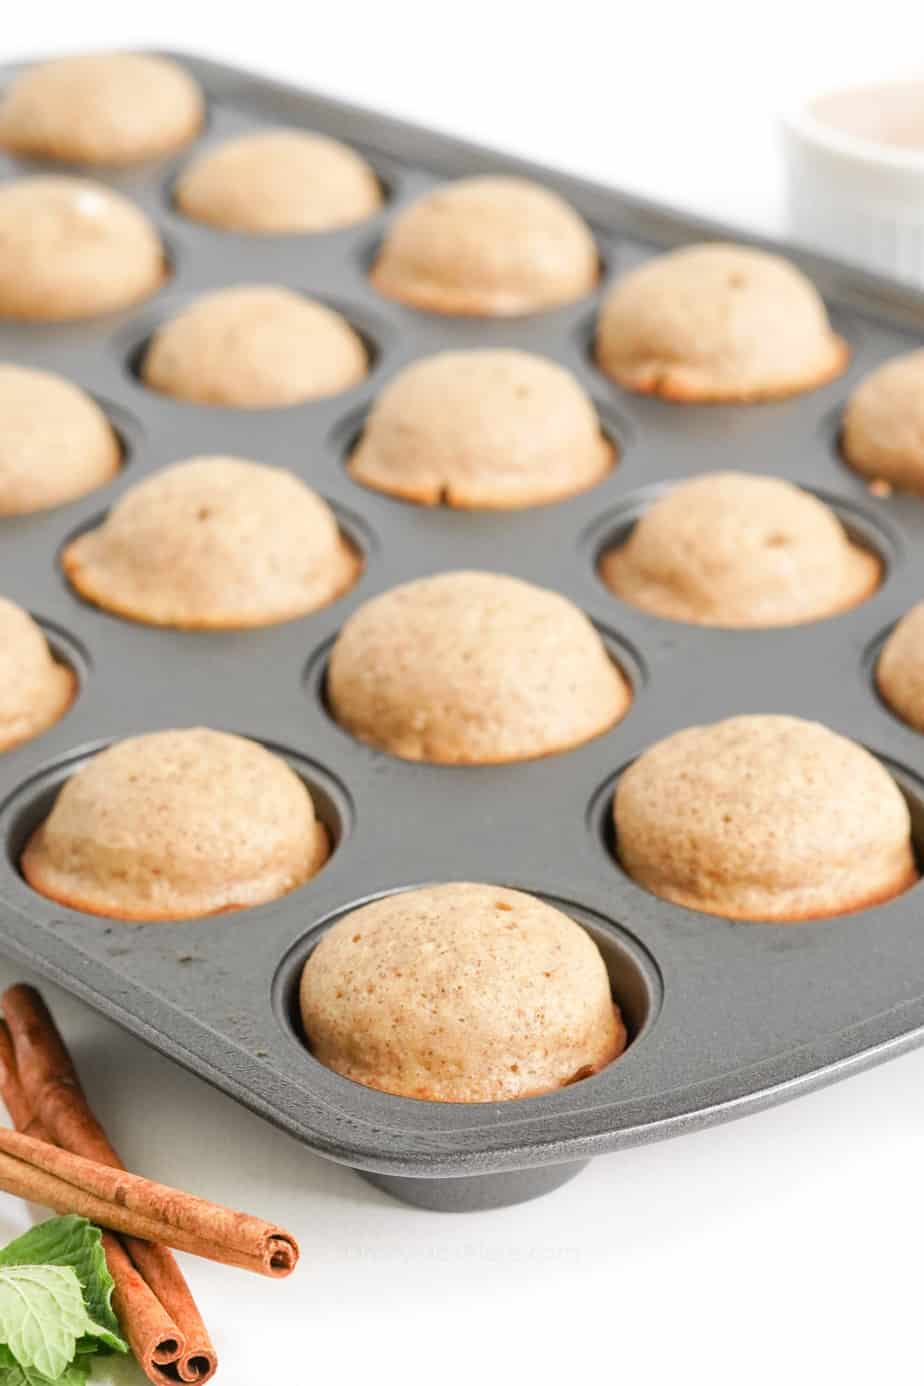 Baked doughnut holes in a mini muffin pan from the side.